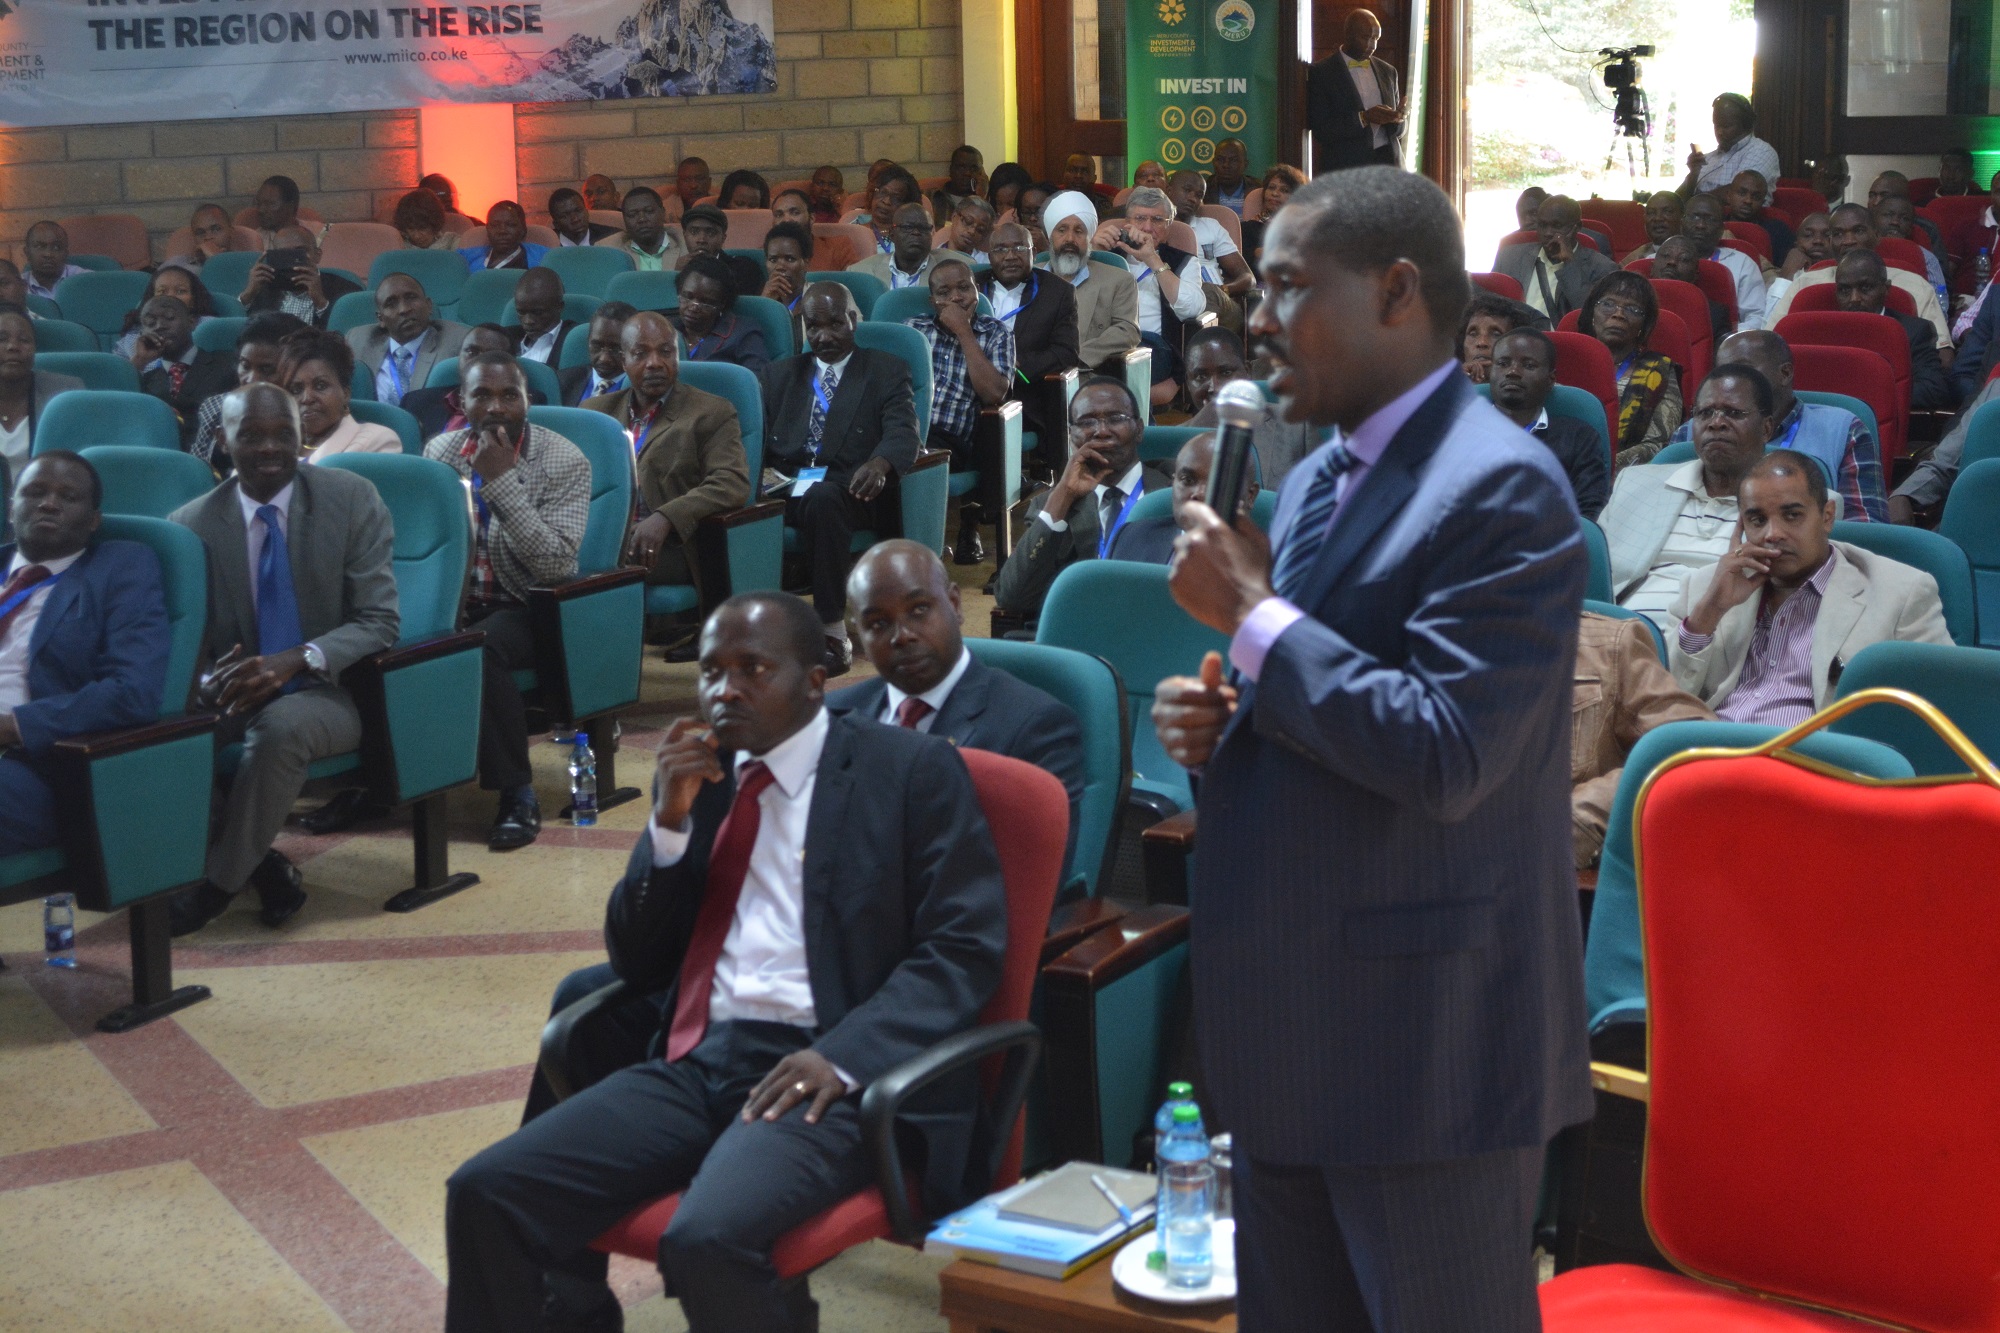 GOVERNOR MUNYA CLOSES INVESTMENT CONFERENCE